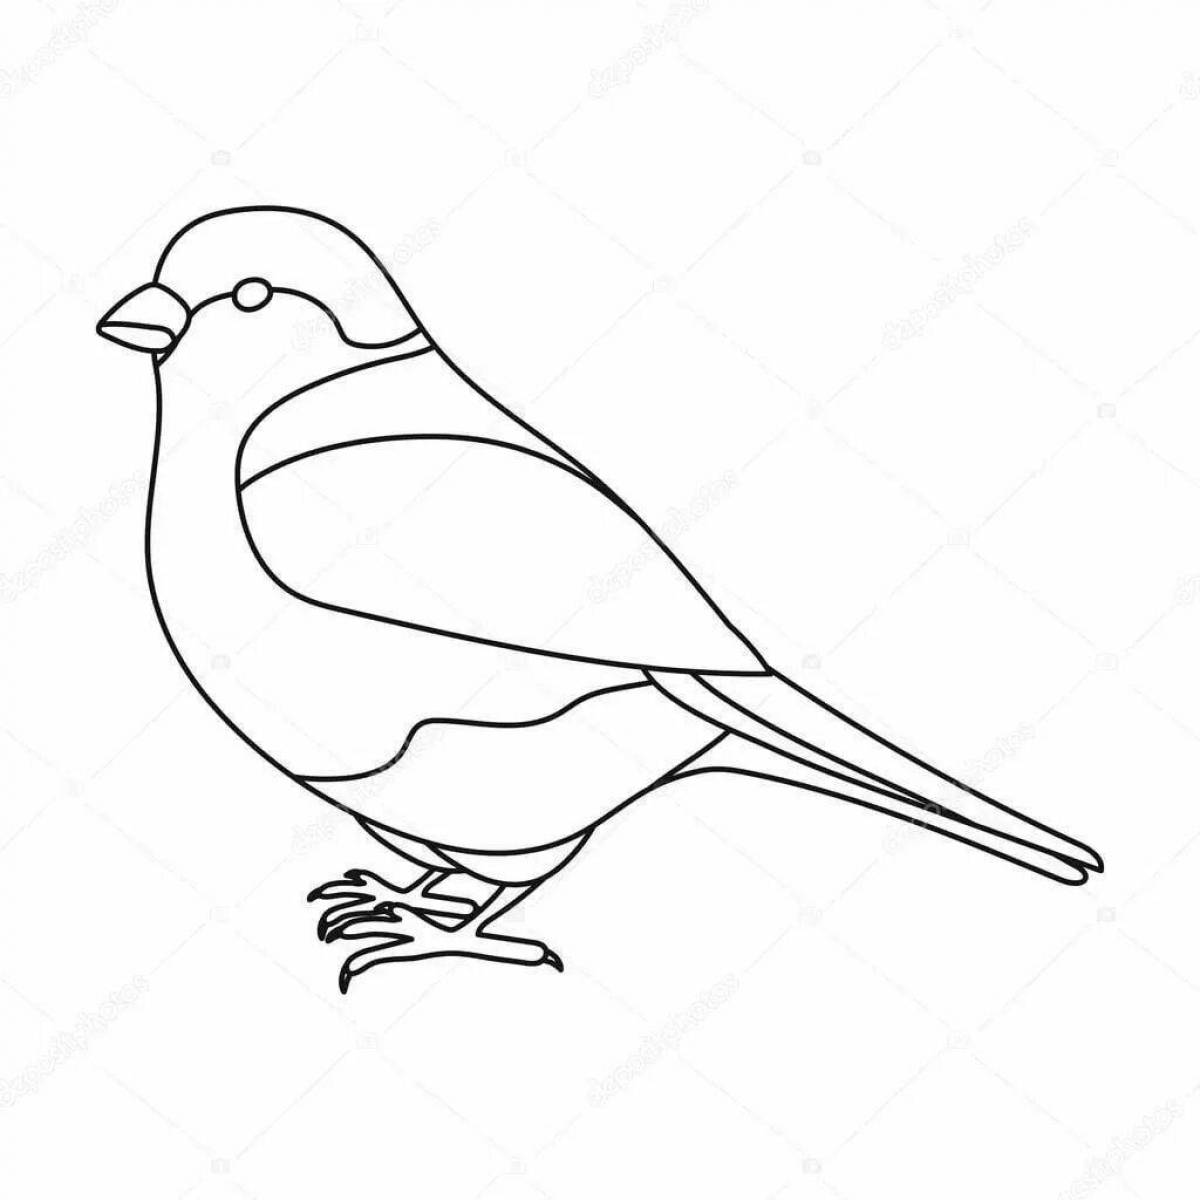 Tempting boobs coloring page